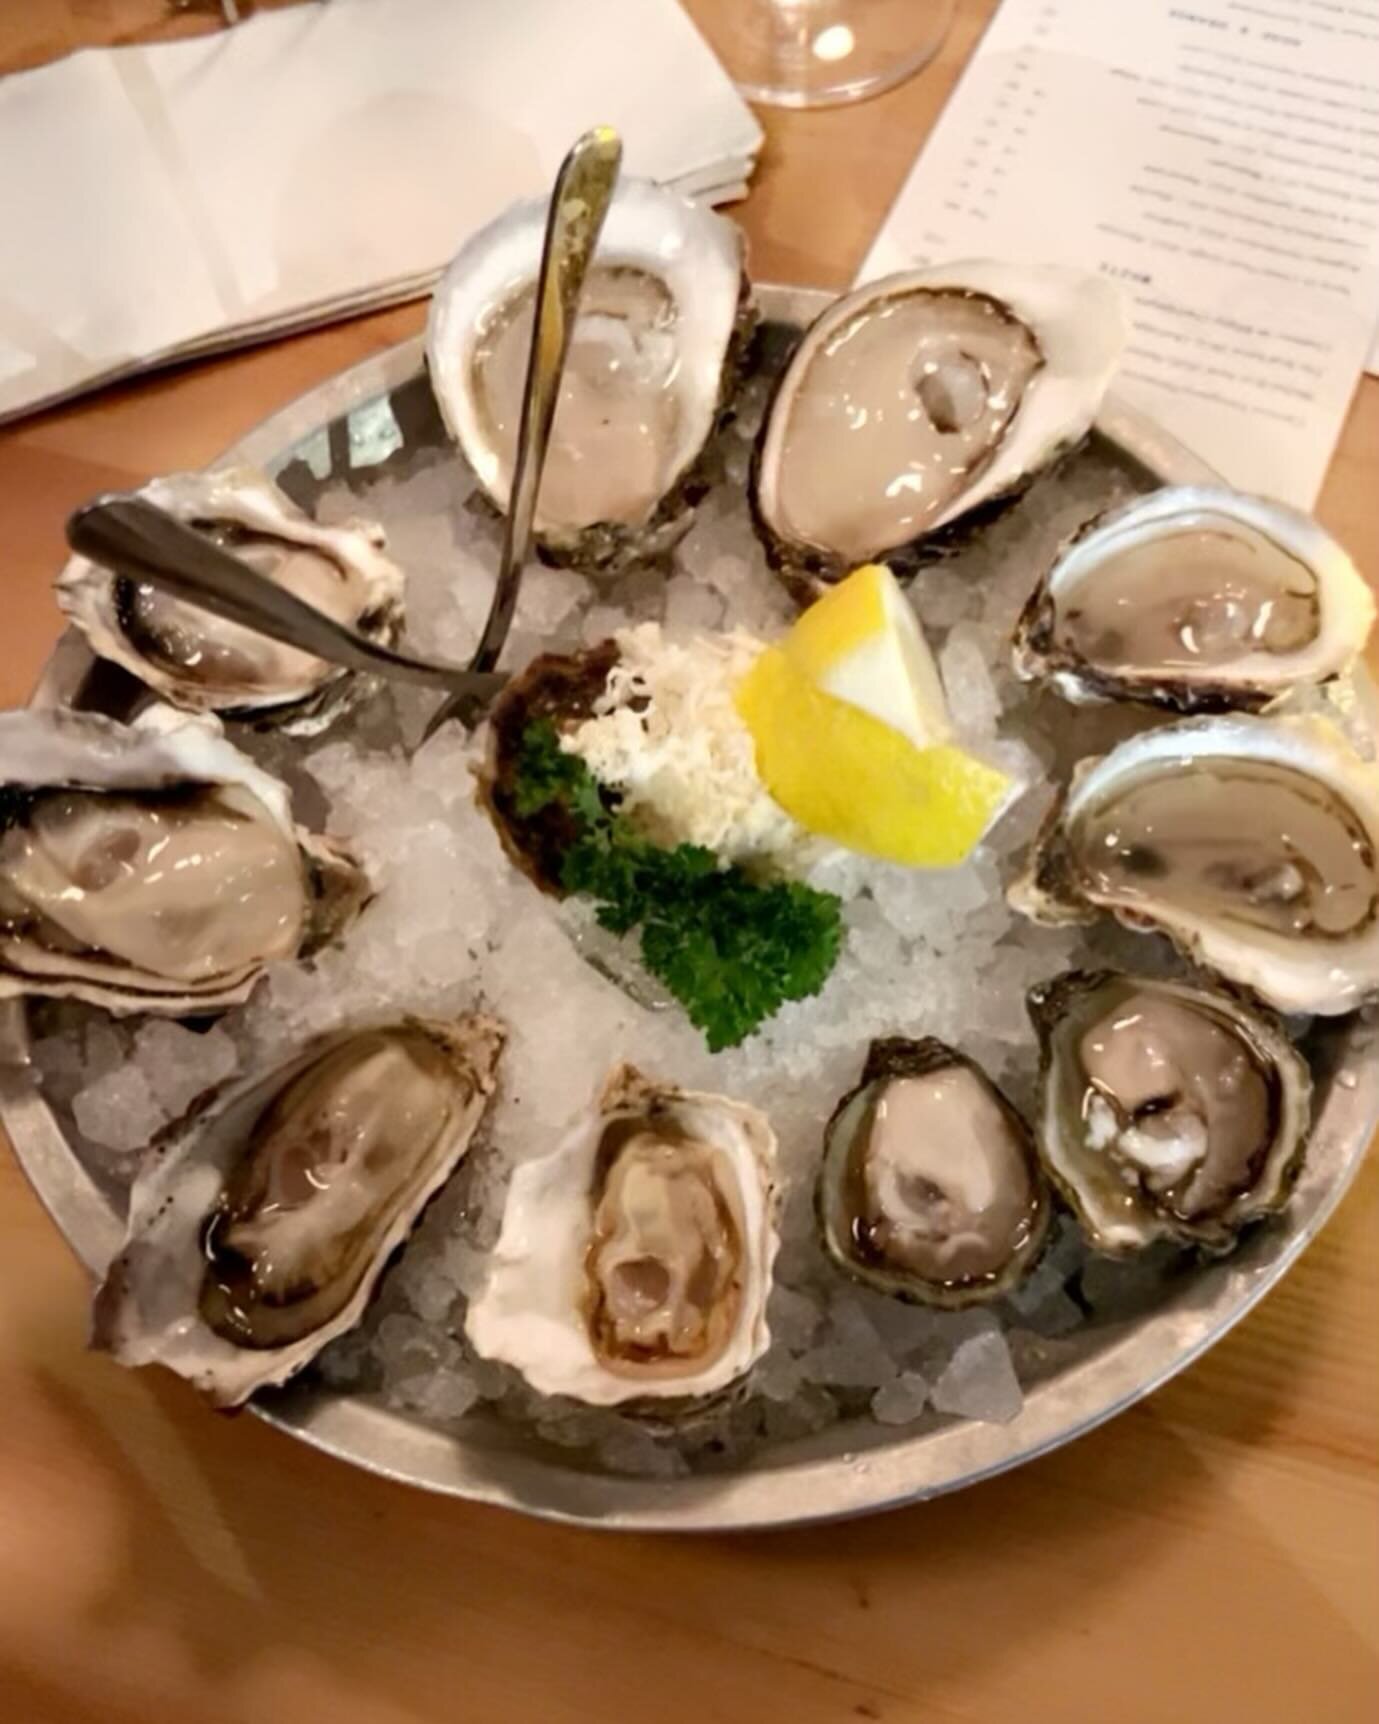 Juicy, delicious oysters at @shucktaylors . So happy to finally visit @wanderingmollusk &lsquo;s new restaurant. Just what Victoria was waiting for!